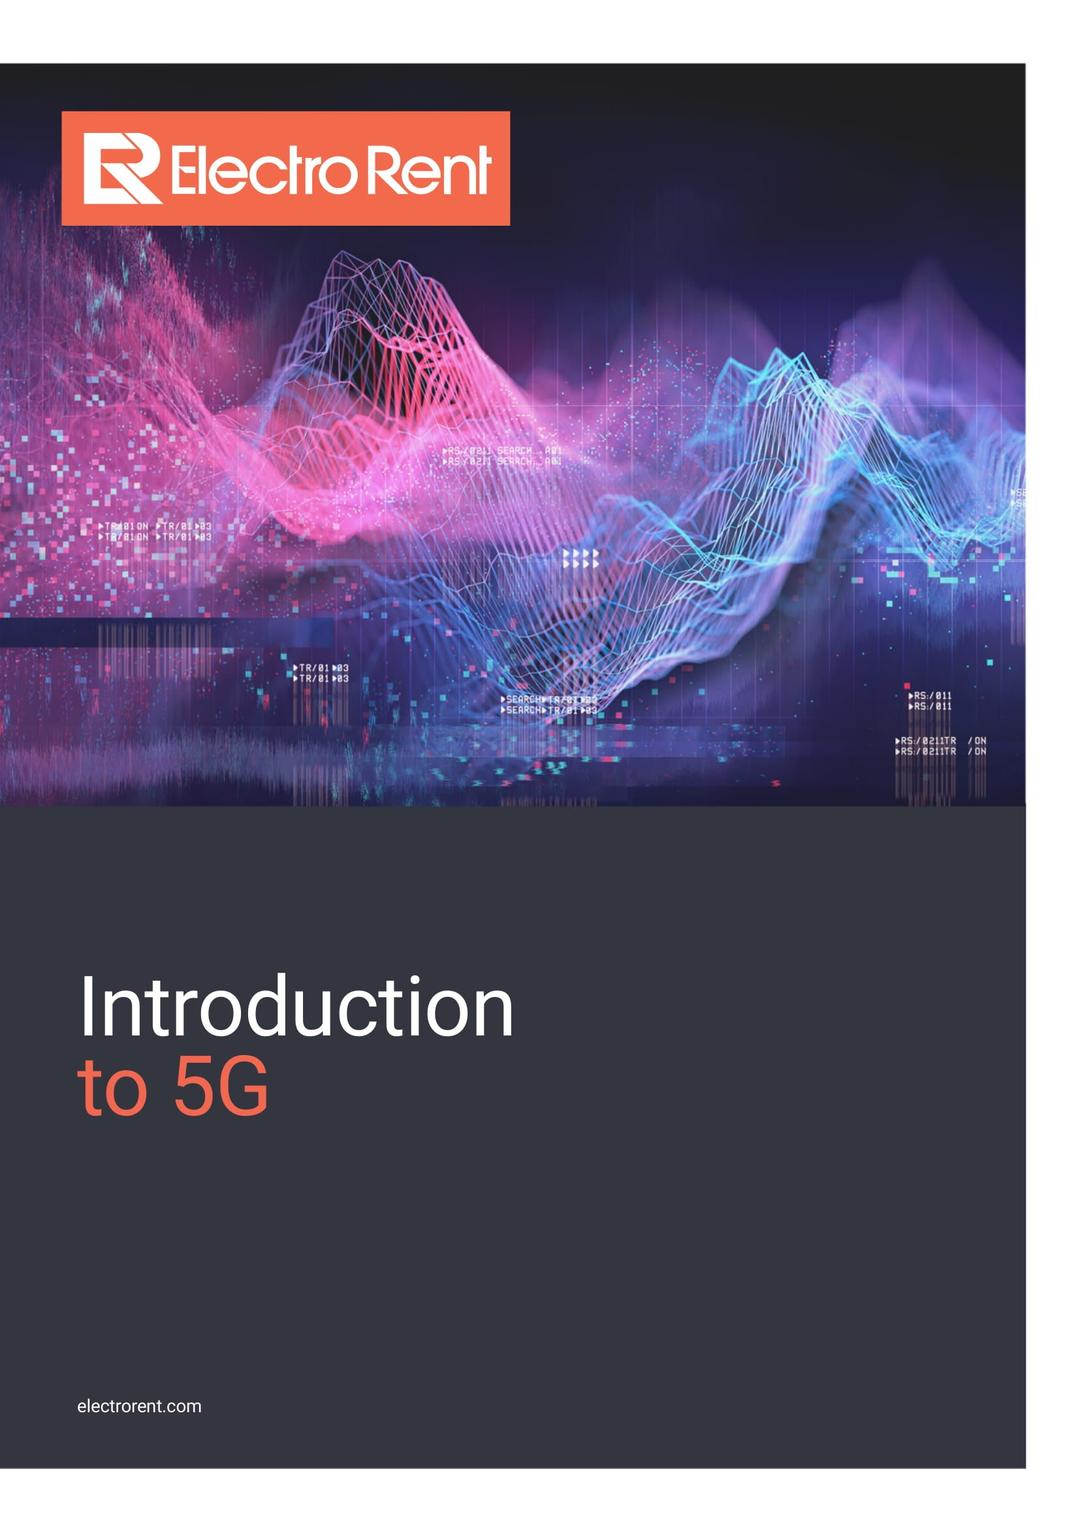 Introduction to 5G, image